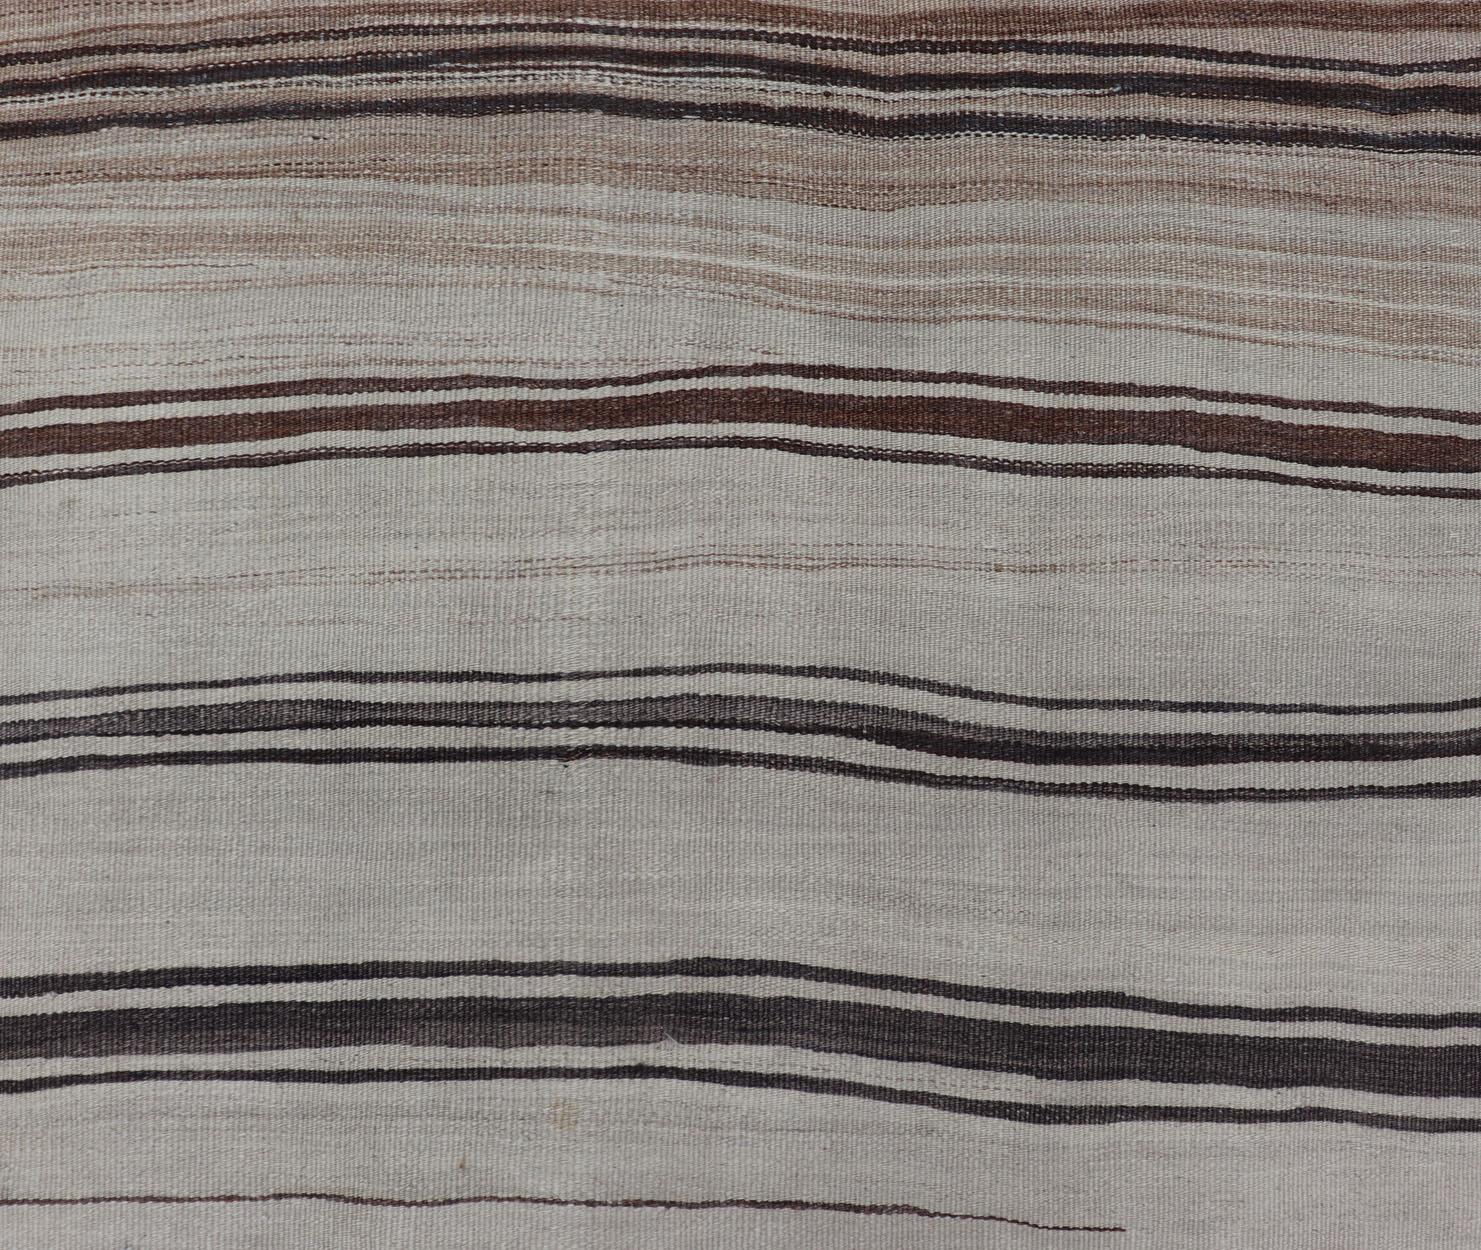 Turkish Vintage Flat-Weave in Shades of Brown and Ivory with Stripe Design For Sale 1